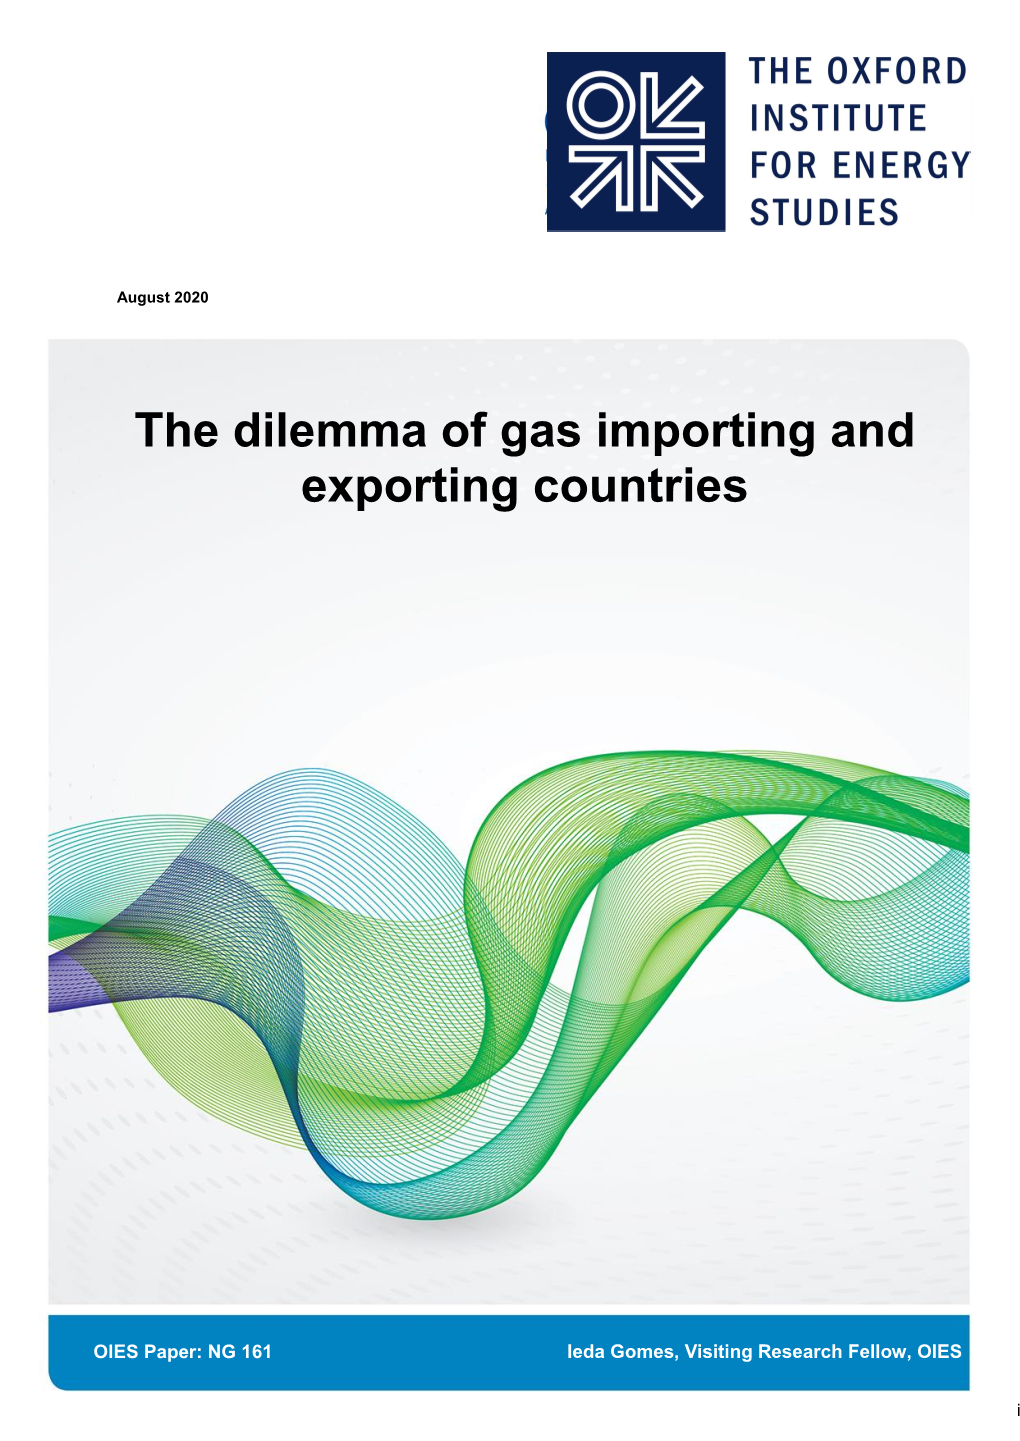 The Dilemma of Gas Importing and Exporting Countries